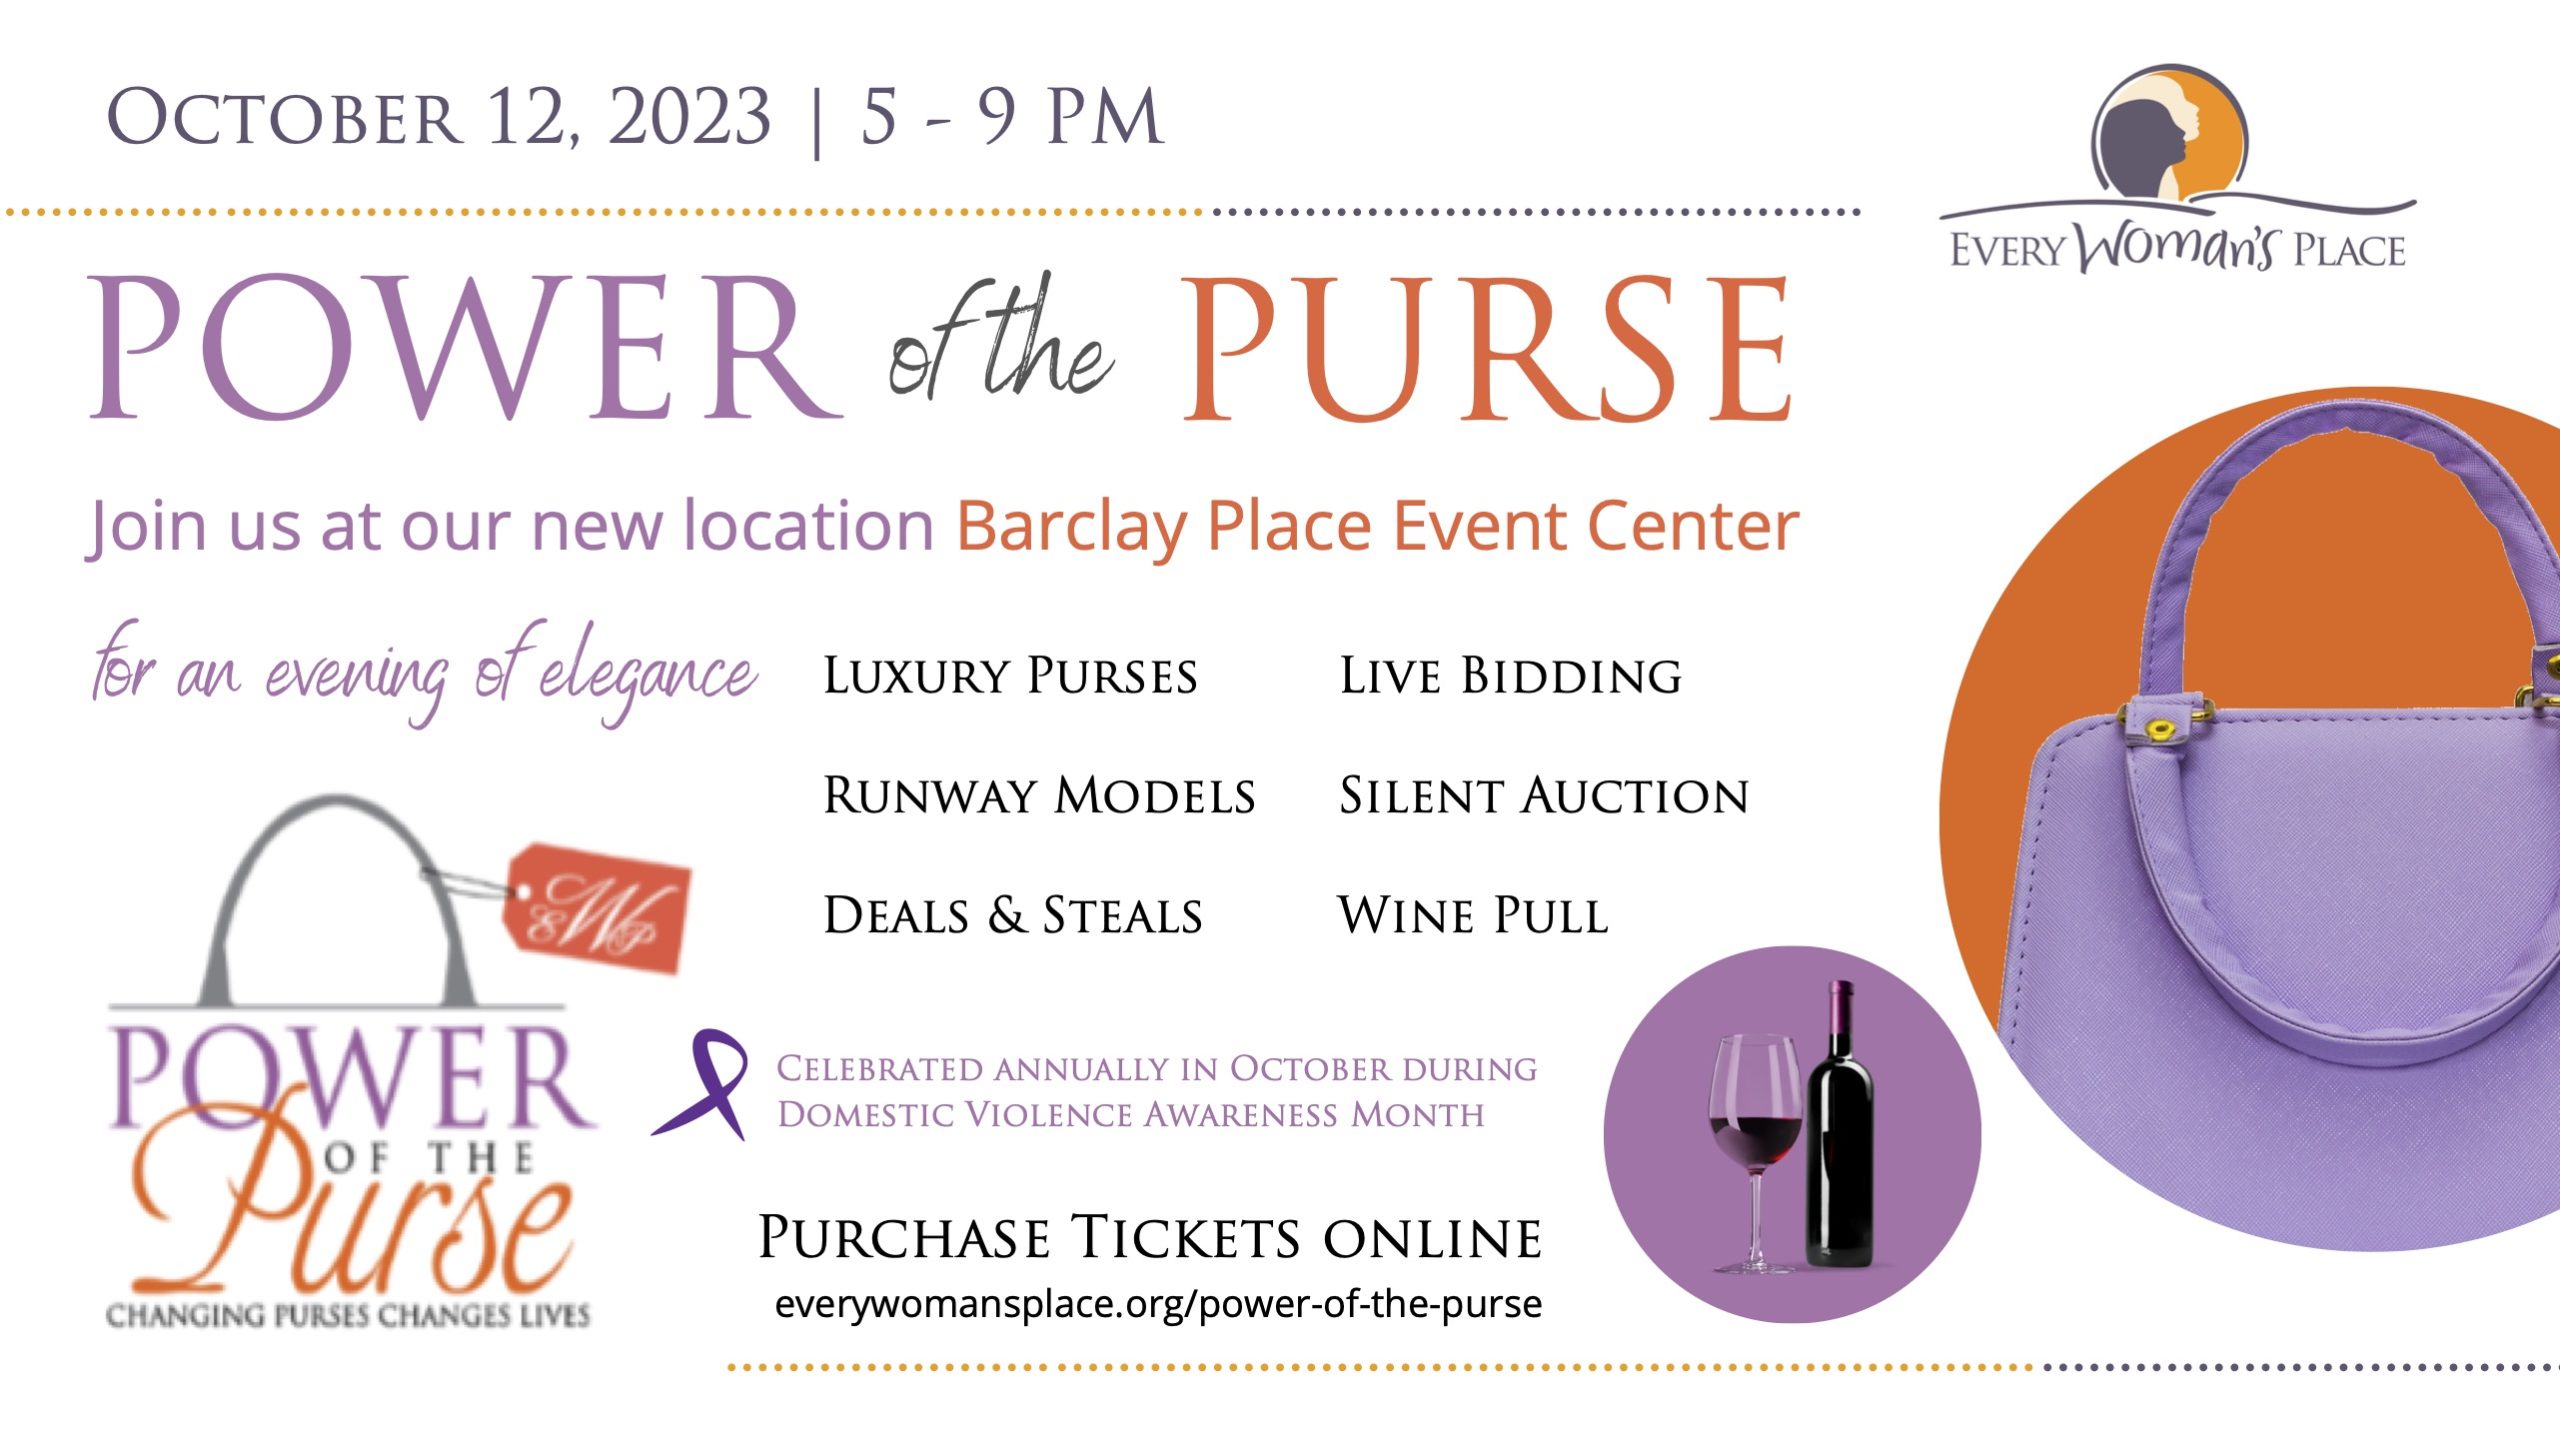 Power of the Purse Every Woman’s Place